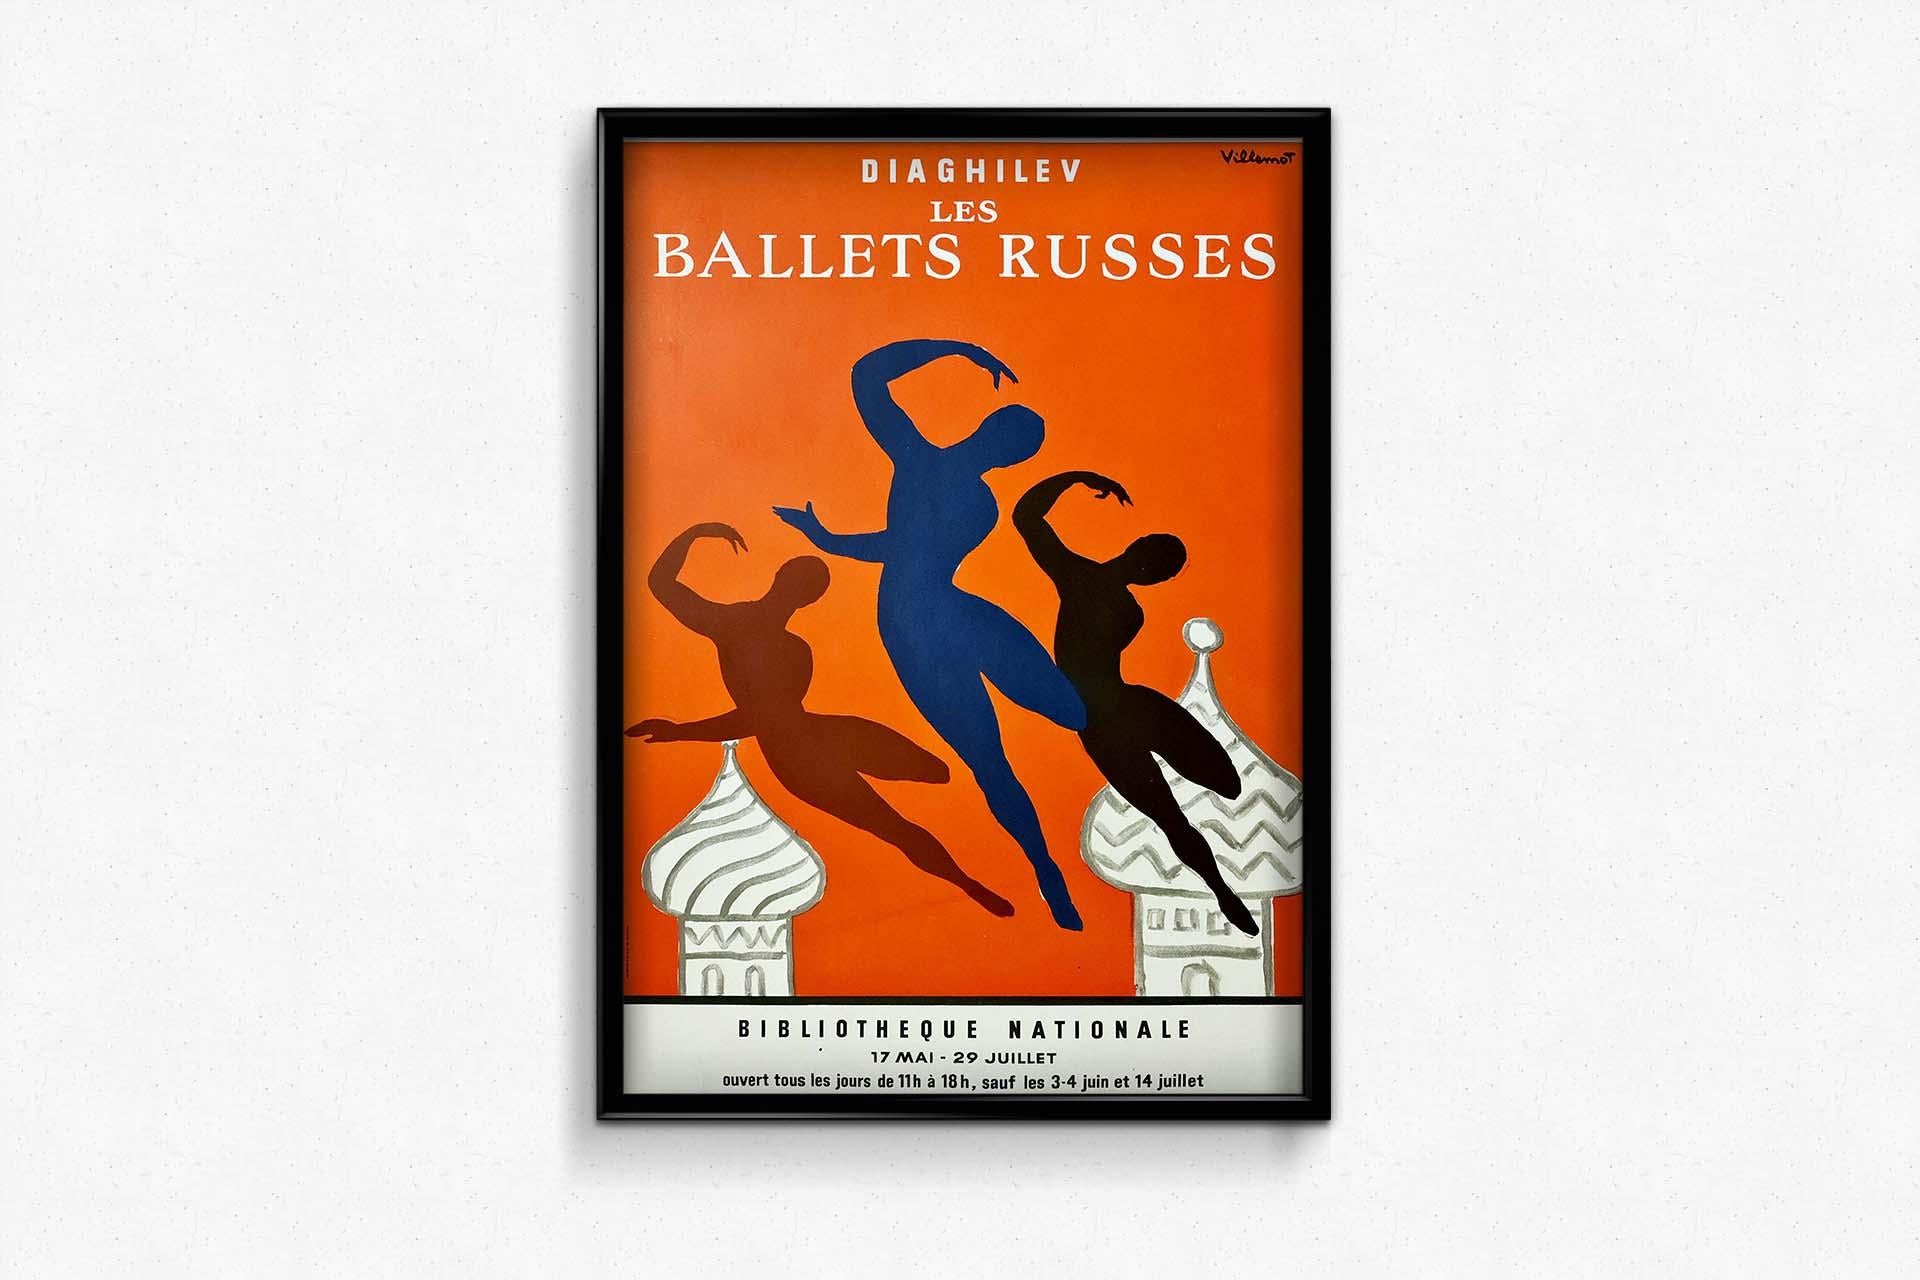 Beautiful poster by Bernard Villemot for Serge Diaghilev's Ballets Russes.

Sergei Pavlovich Diaghilev, usually referred to outside Russia as Serge Diaghilev, was a Russian art critic, patron, ballet impresario and founder of the Ballets Russes,